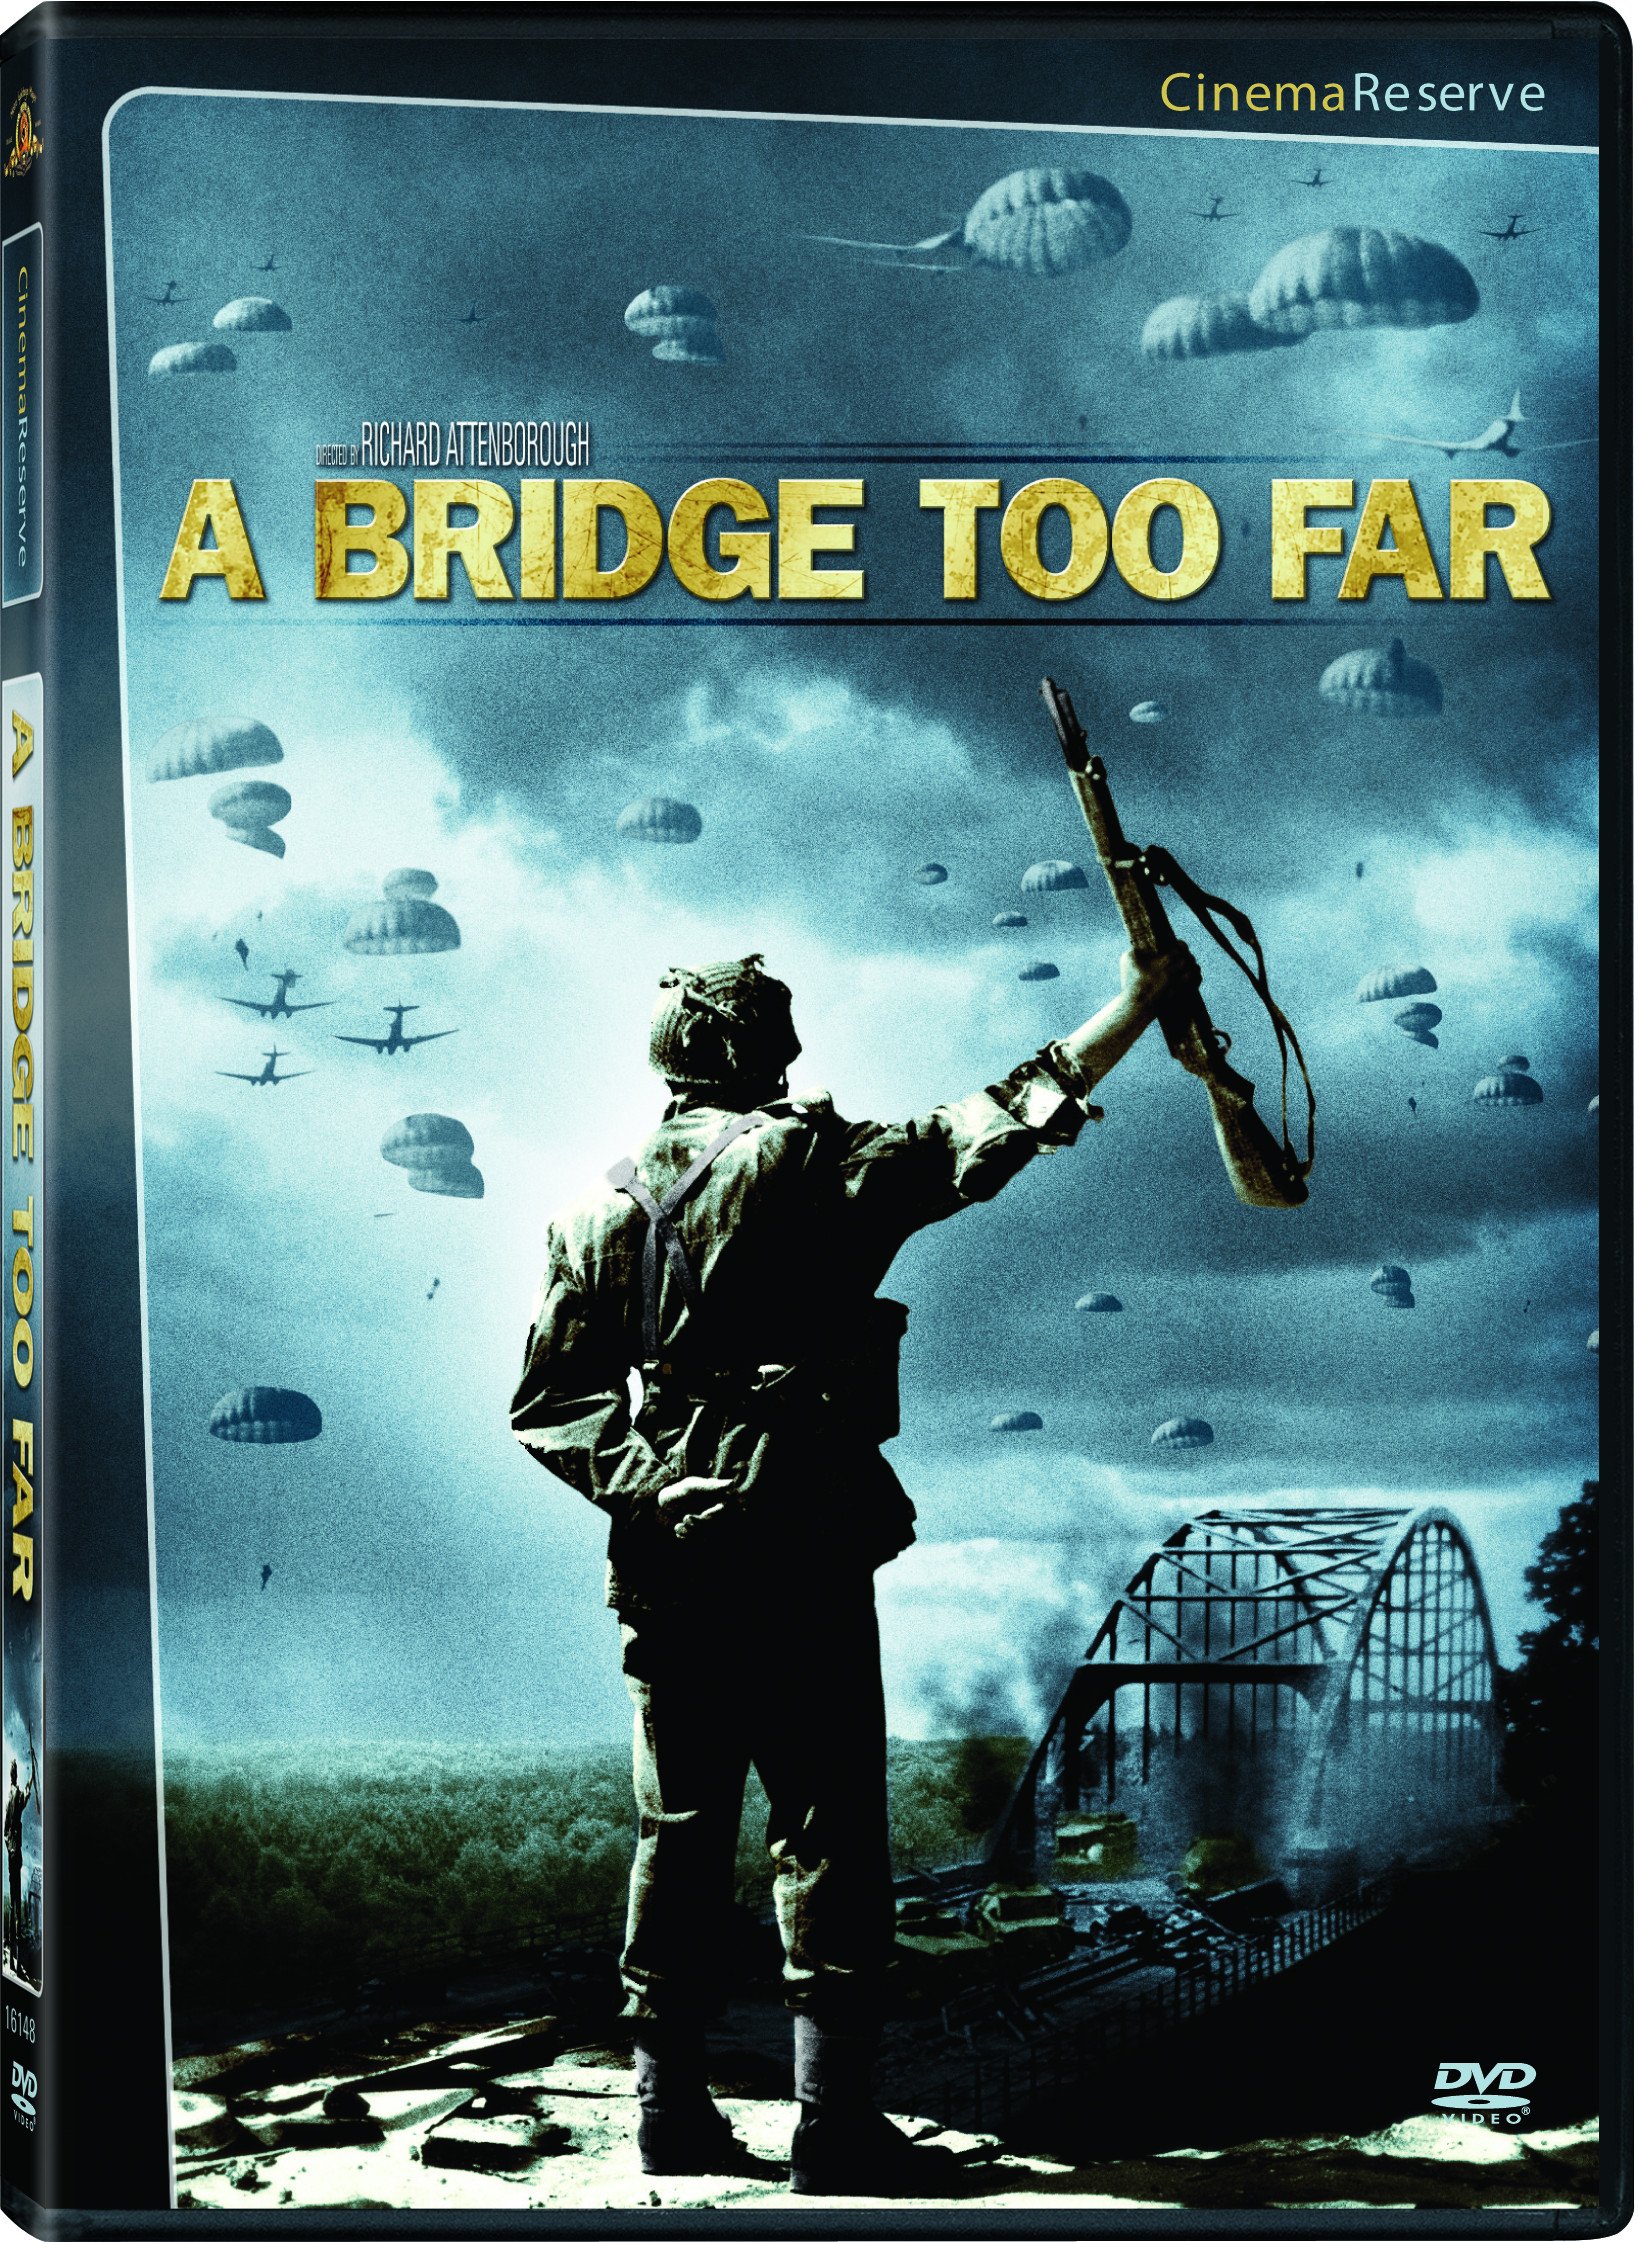 a-bridge-too-far-movie-purchase-or-watch-online